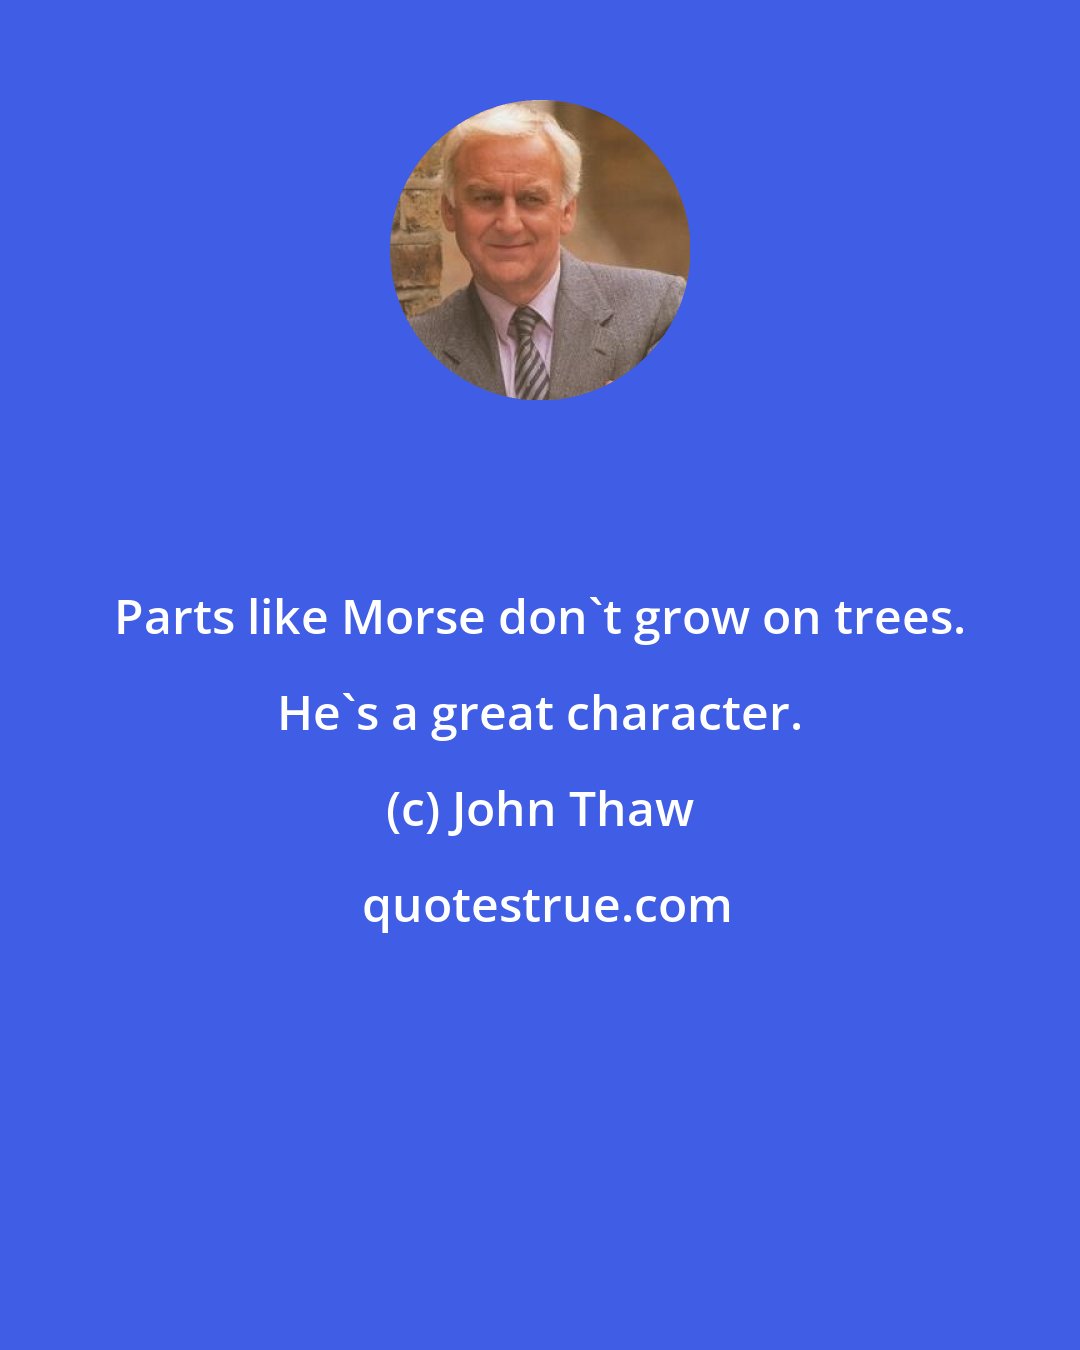 John Thaw: Parts like Morse don't grow on trees. He's a great character.